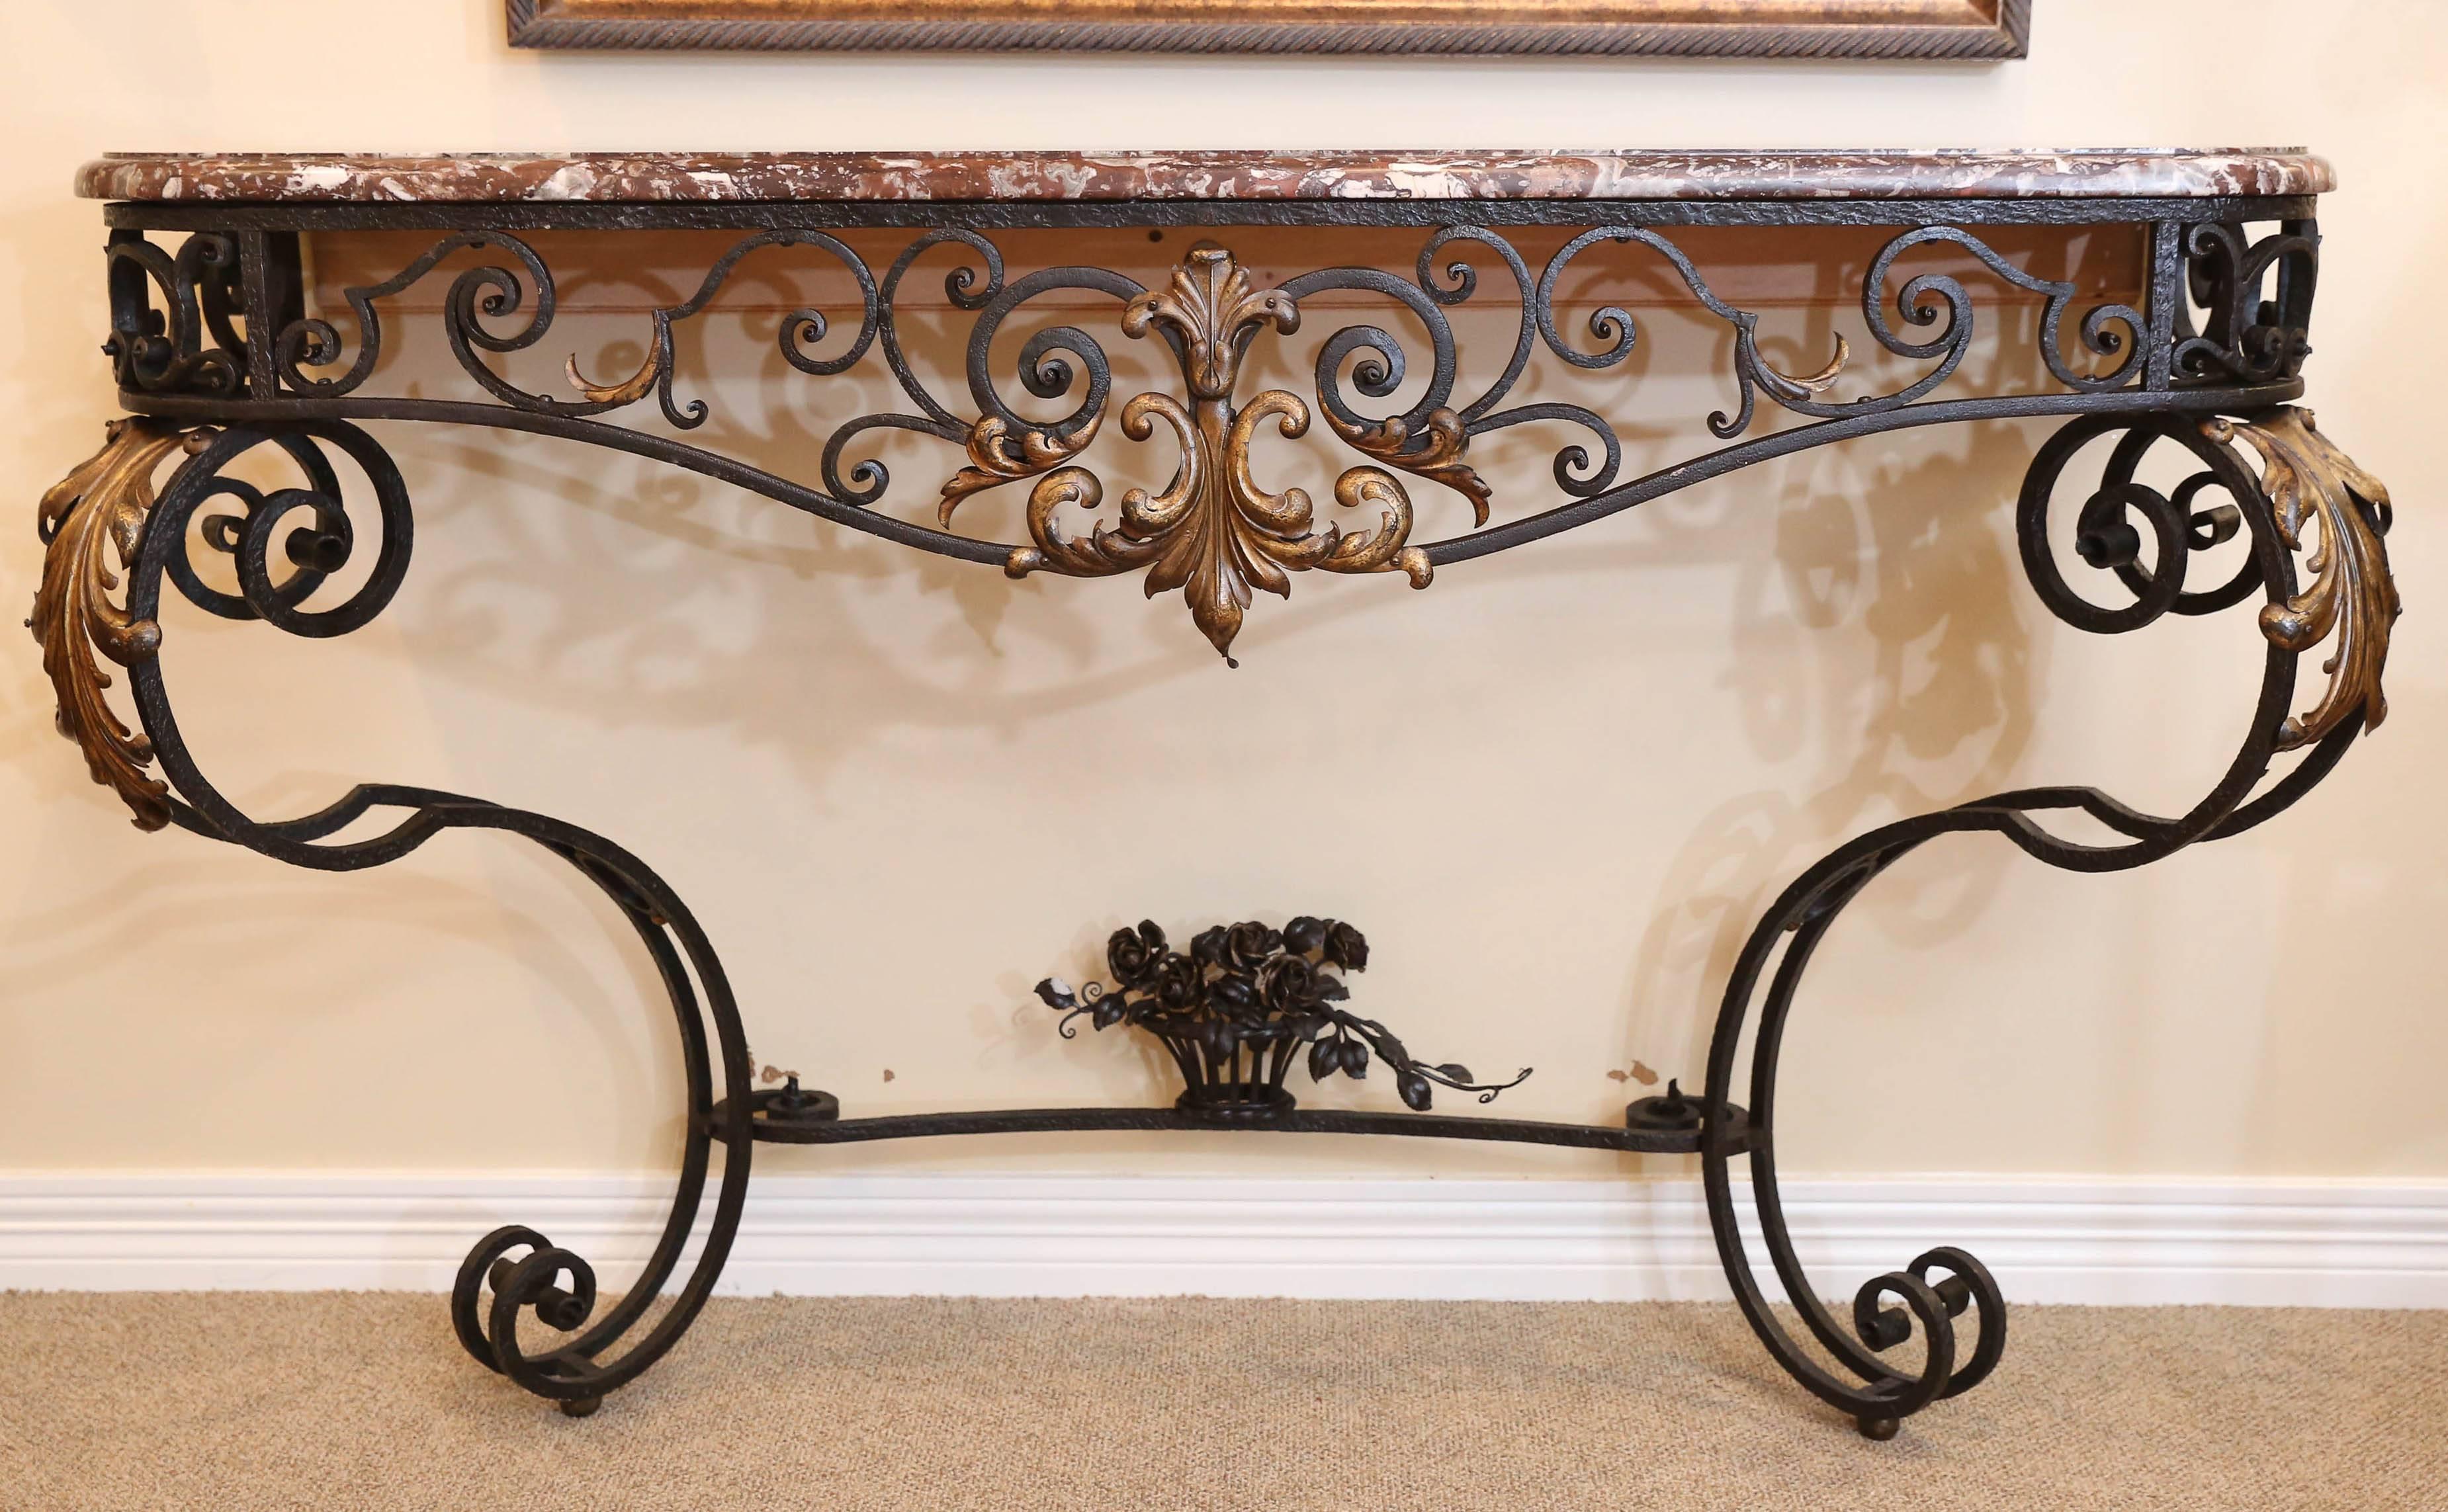 Iron console with leaf and floral detailing with rouge marble top.
Fine detail work and scrolling legs with a lovely bowed and scrolled
front that dips gracefully.